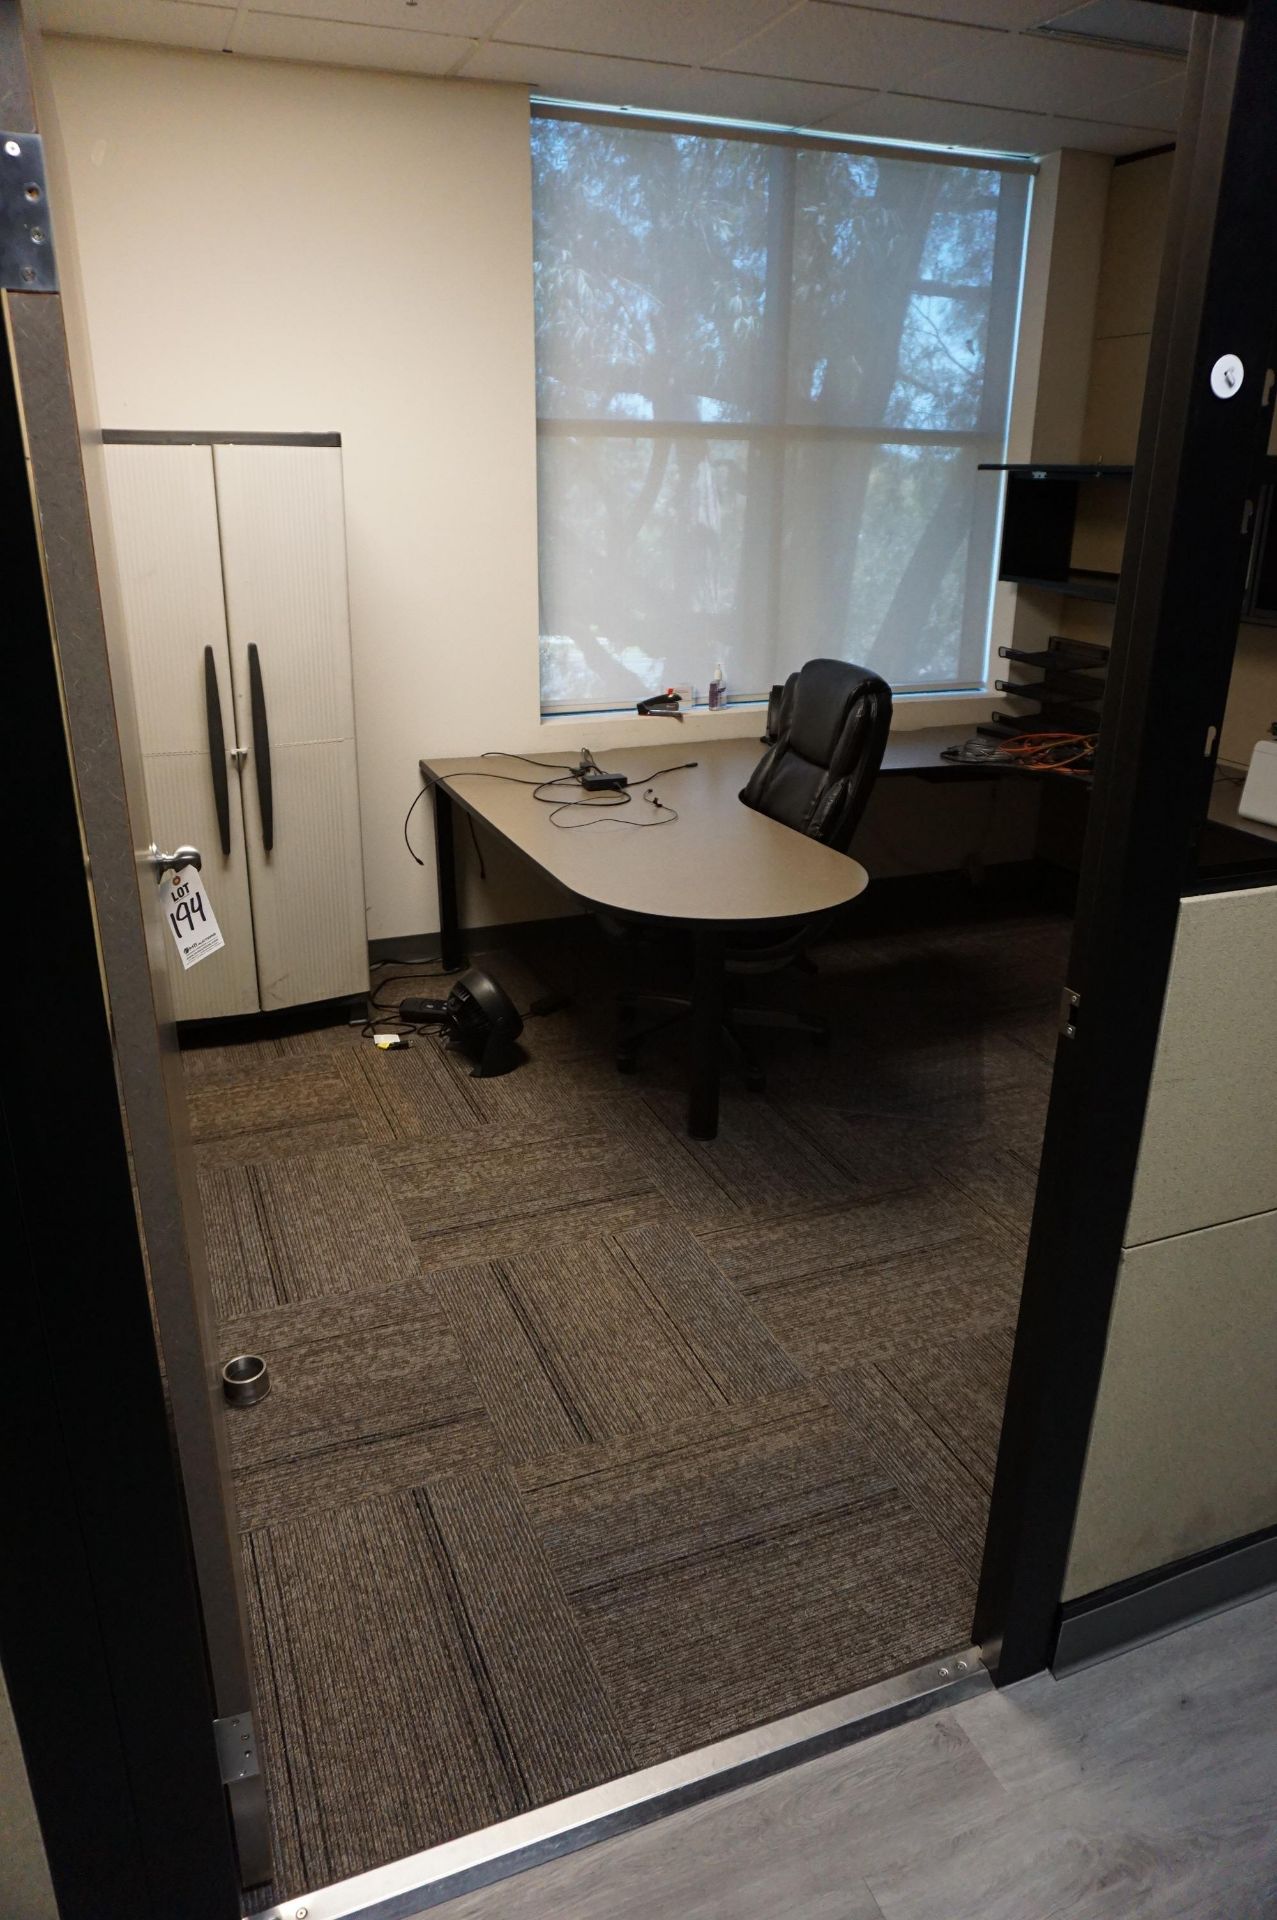 SECOND FLOOR OFFICE TO INCLUDE: WRAPAROUND OFFICE DESK WITH ATTACHED FILE CABINETS, OFFICE CHAIRS *